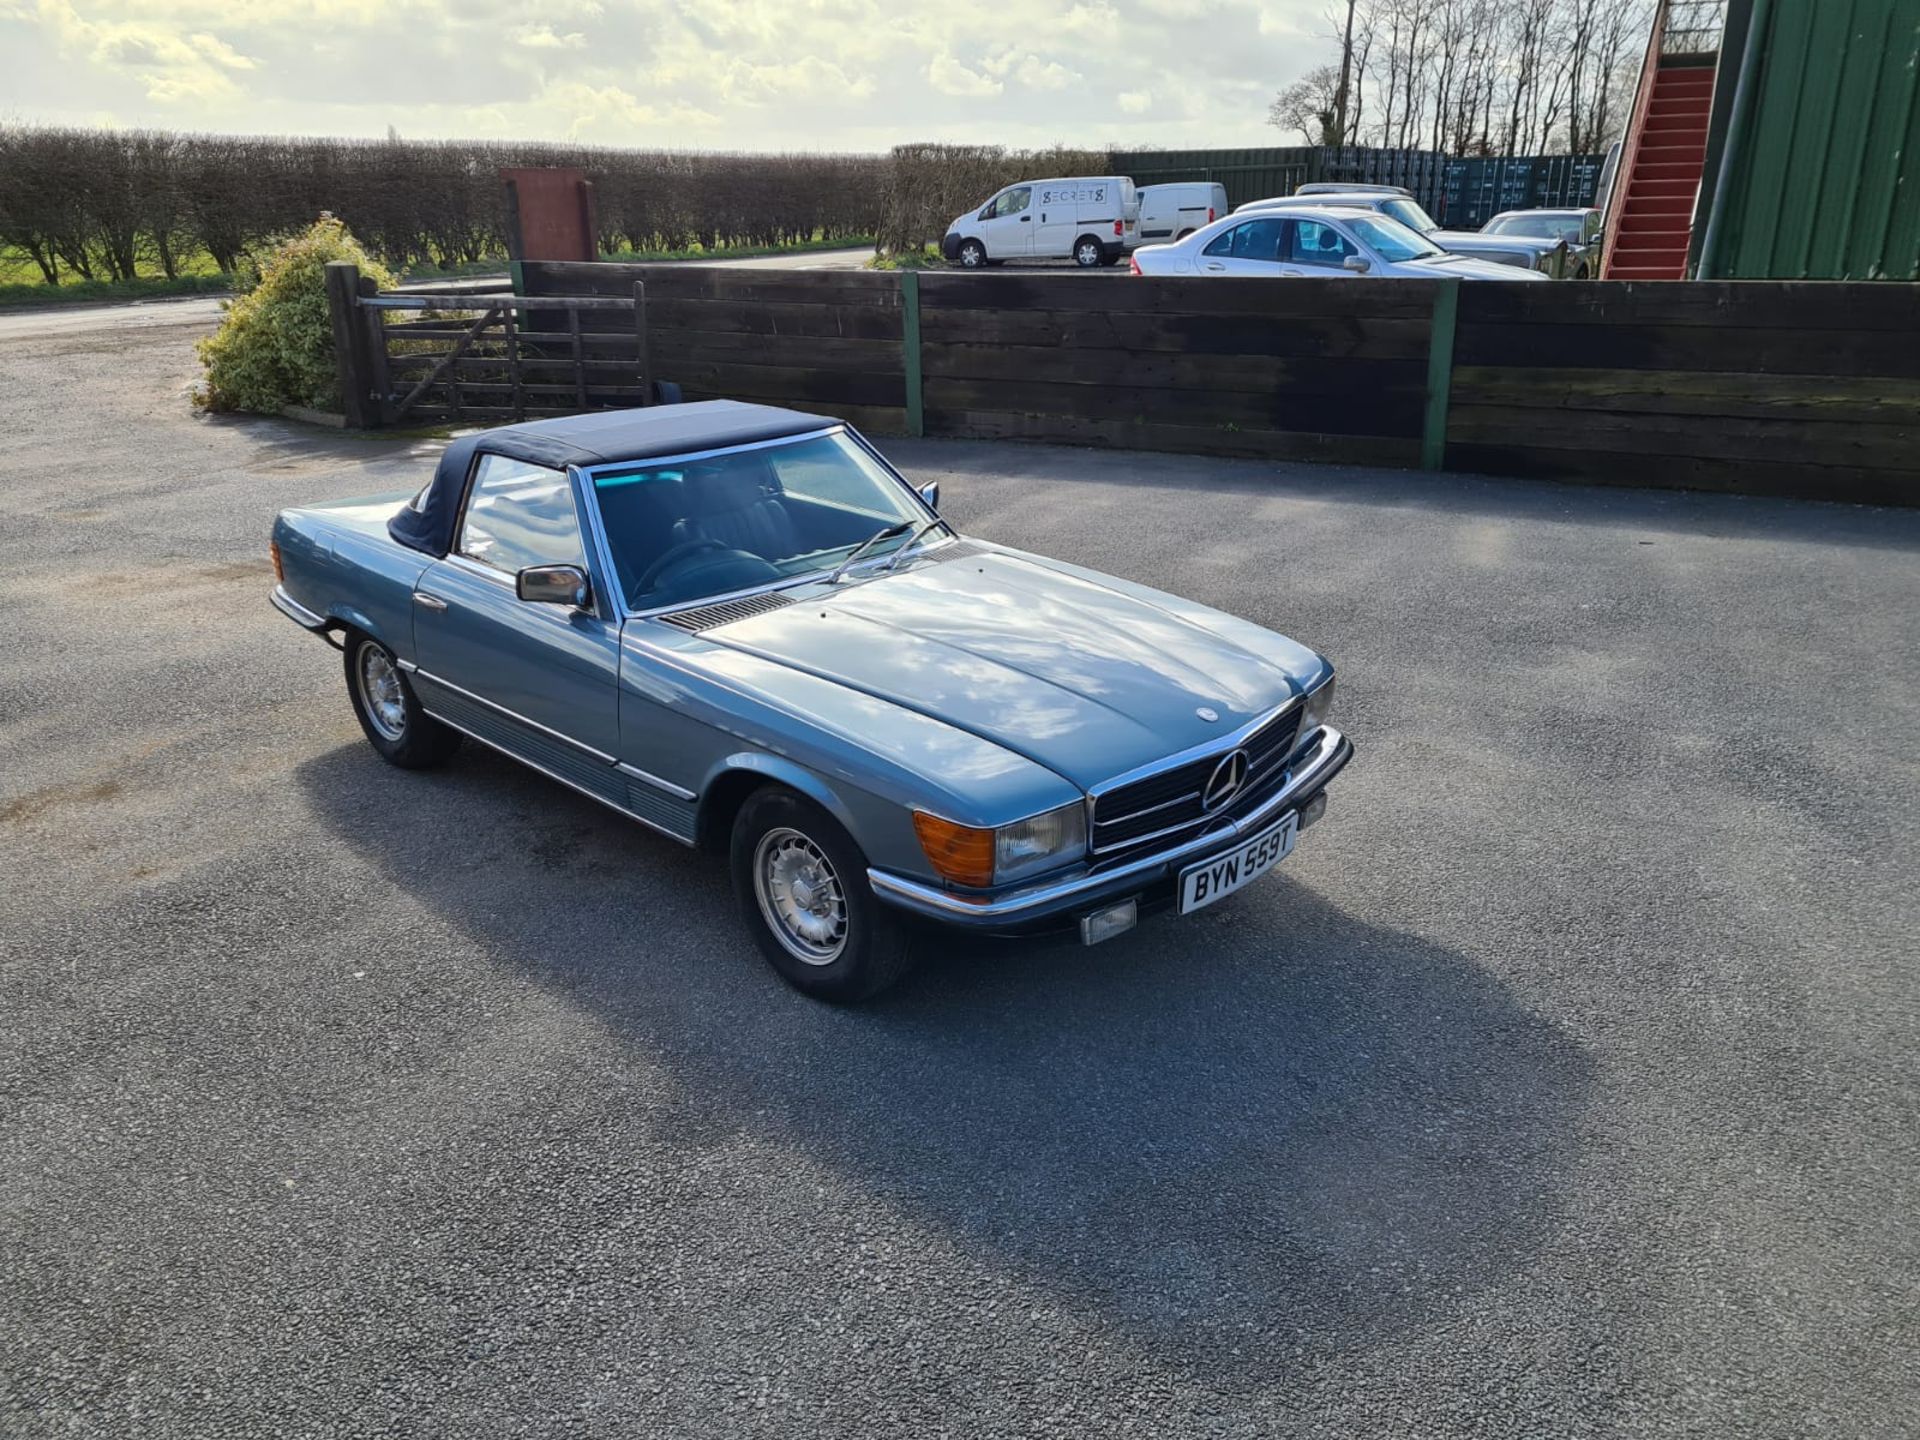 Stunning 1979 Mercedes Benz SL350 V8 With Factory Hardtop - Restored in 2018 - Image 12 of 22